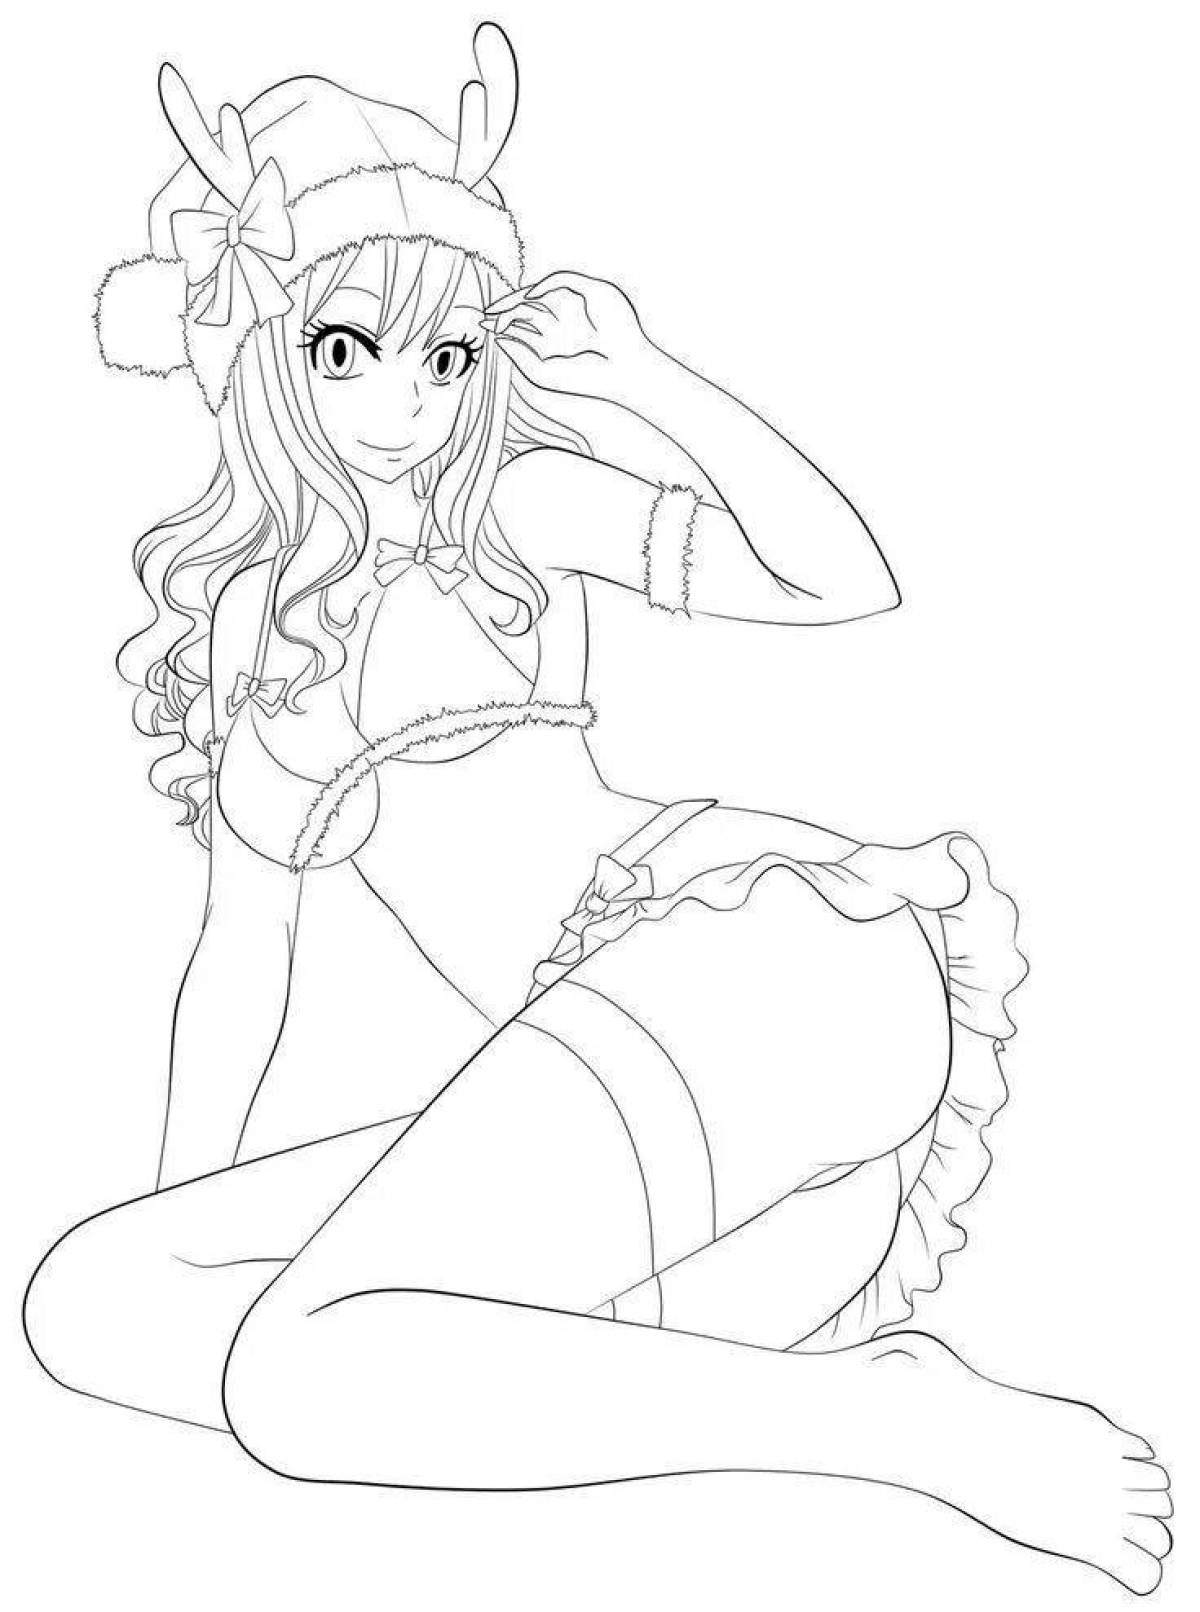 Coloring page divine anime sex